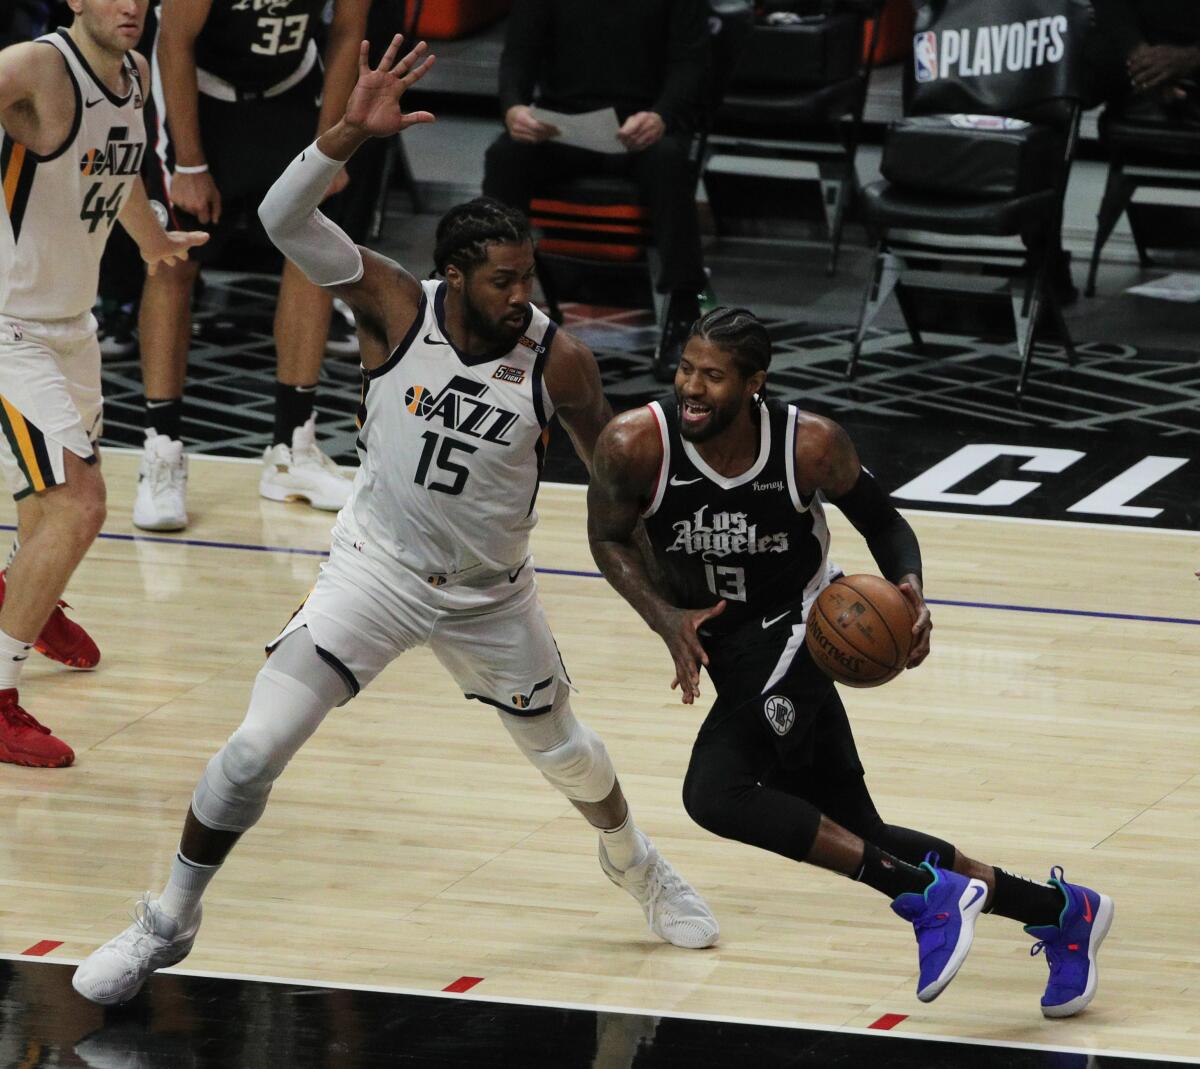 The Clippers' Paul George drives to the basket against the Utah Jazz's Derrick Favors in the second half June 12, 2021.